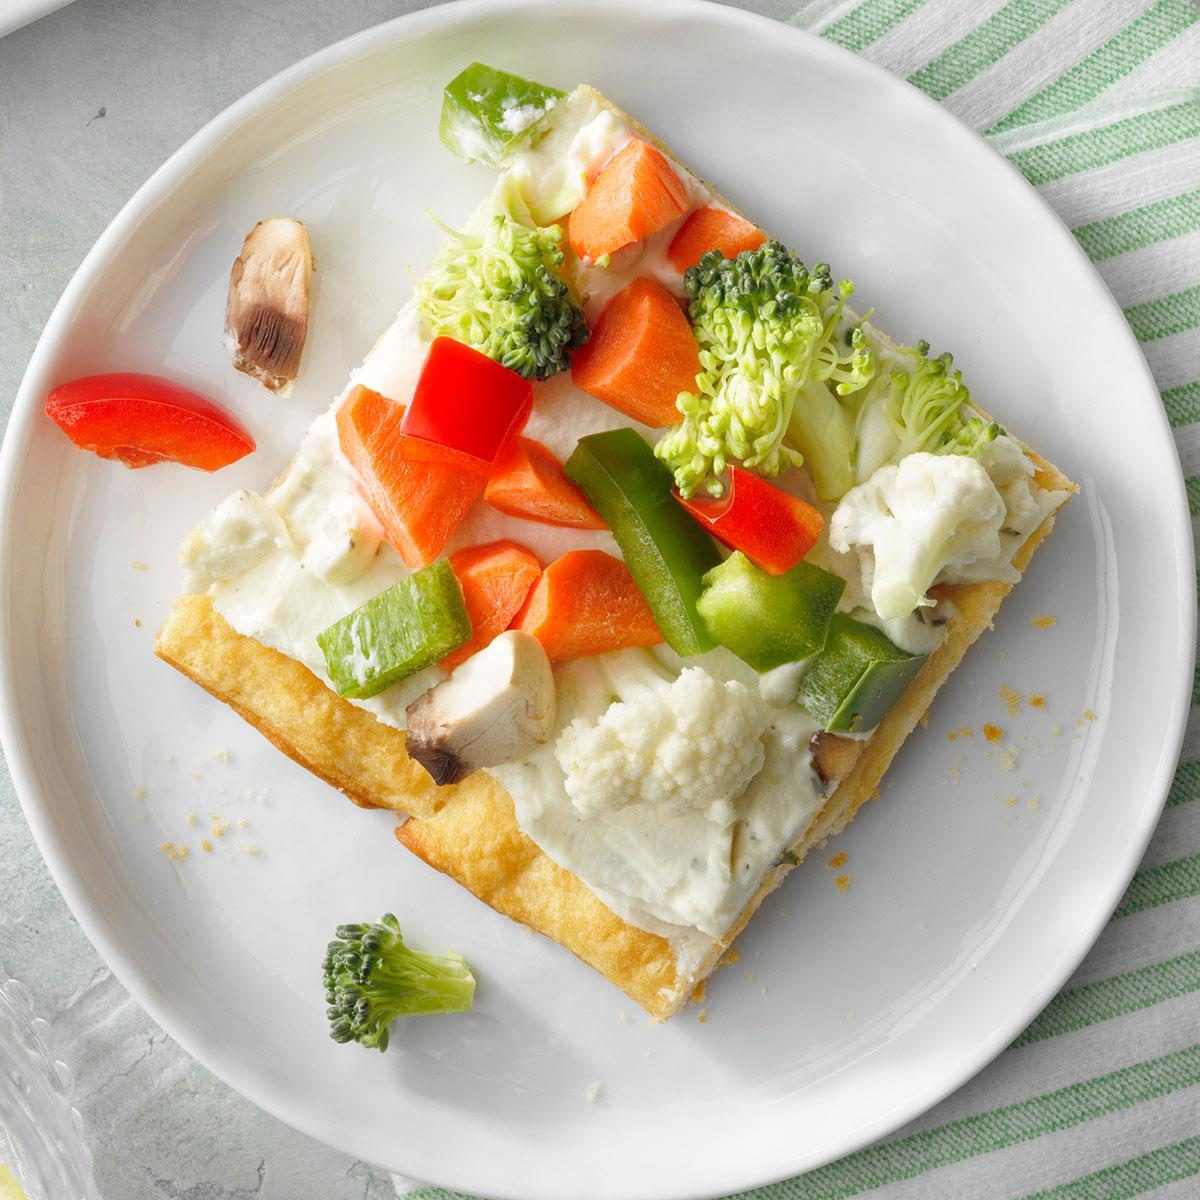 <p>Don't sweat it when it comes to tailgate food. Just carry in this colorful veggie pizza that's topped with a rainbow of crunchy vegetables! —Brooke Wiley, Halifax, Virginia</p> <div class="listicle-page__buttons"> <div class="listicle-page__cta-button"><a href='https://www.tasteofhome.com/recipes/fresh-veggie-pizza/'>Go to Recipe</a></div> </div>